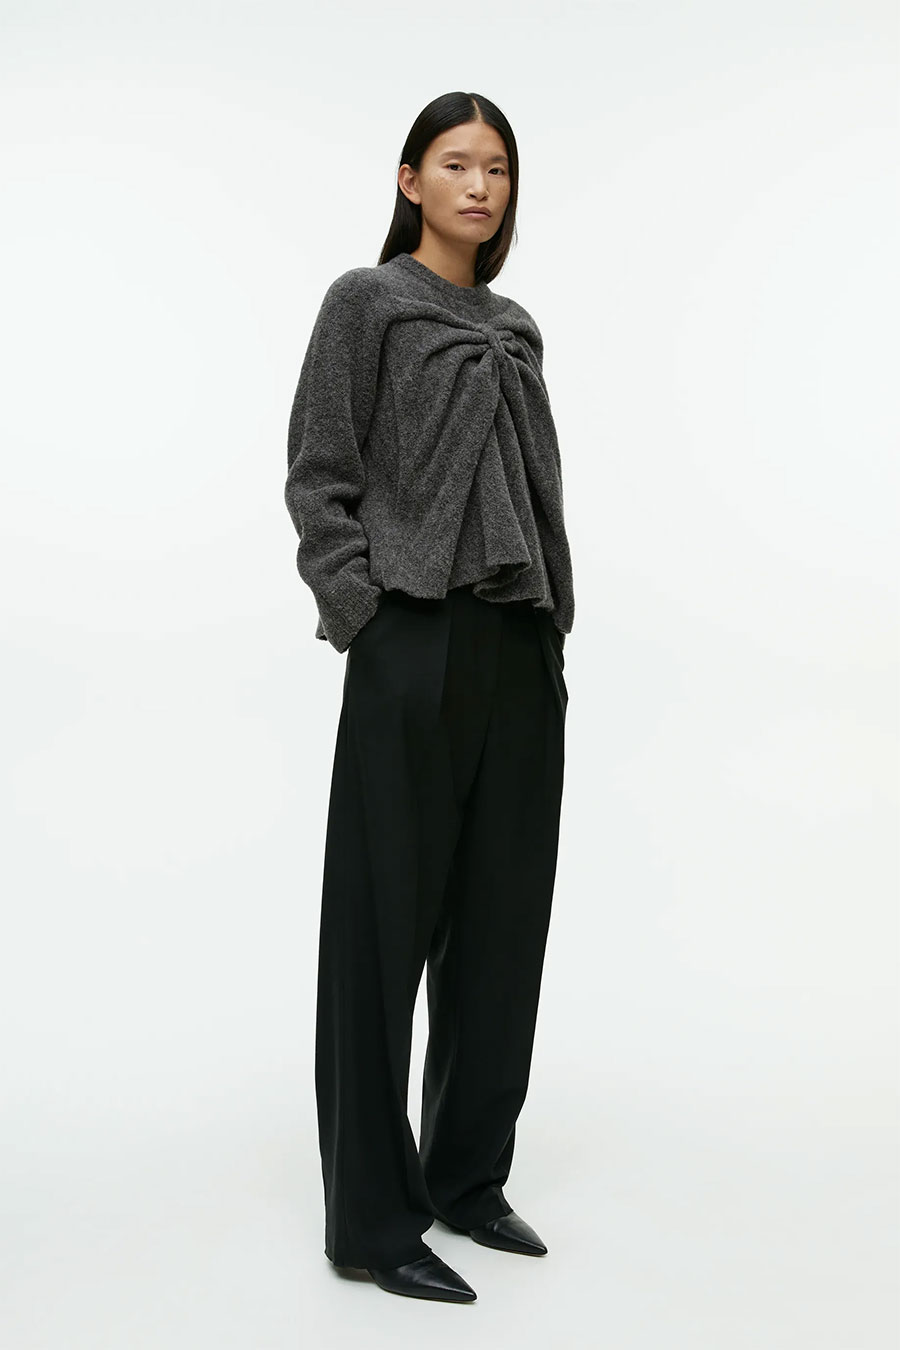 Statement Sweater and Black Pants